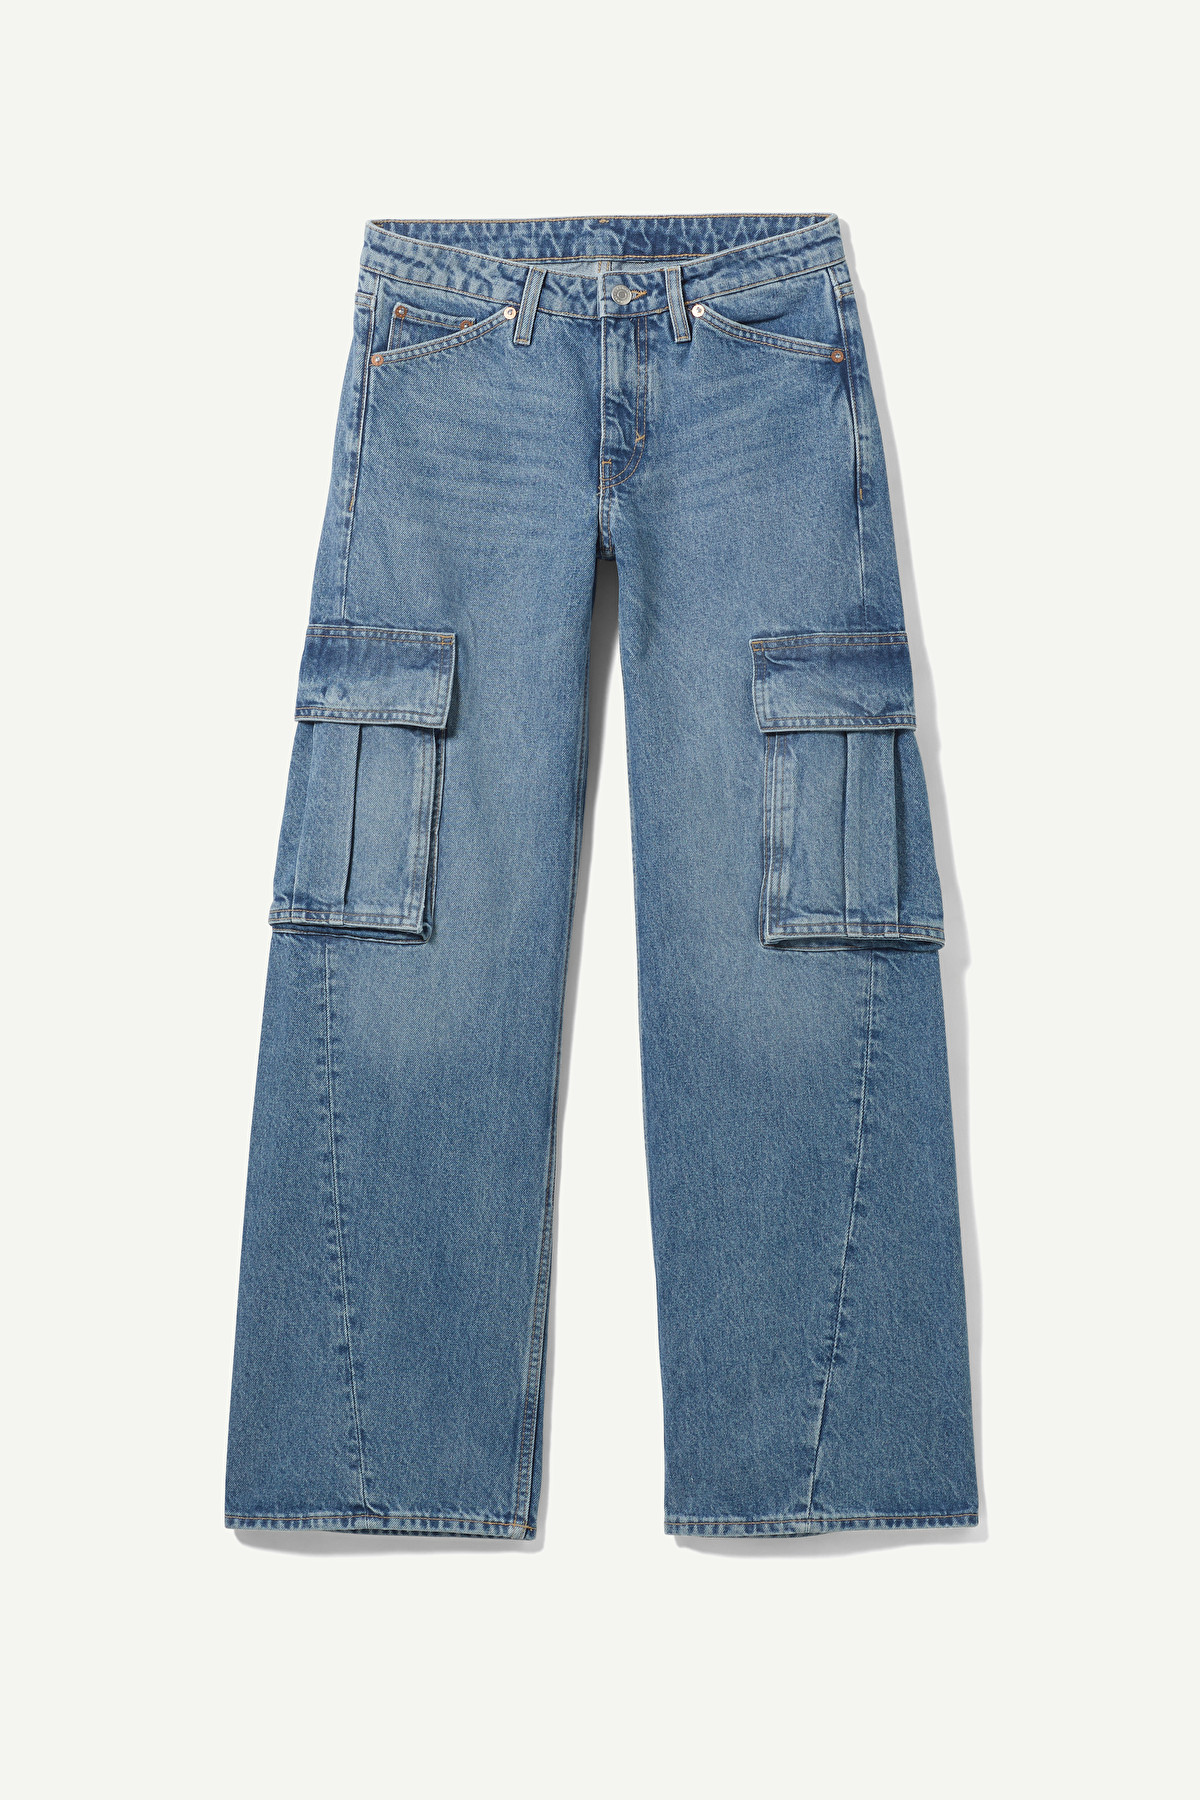 8 Summer 2022 Jeans Trends Fashion People Are Loving | Who What Wear UK